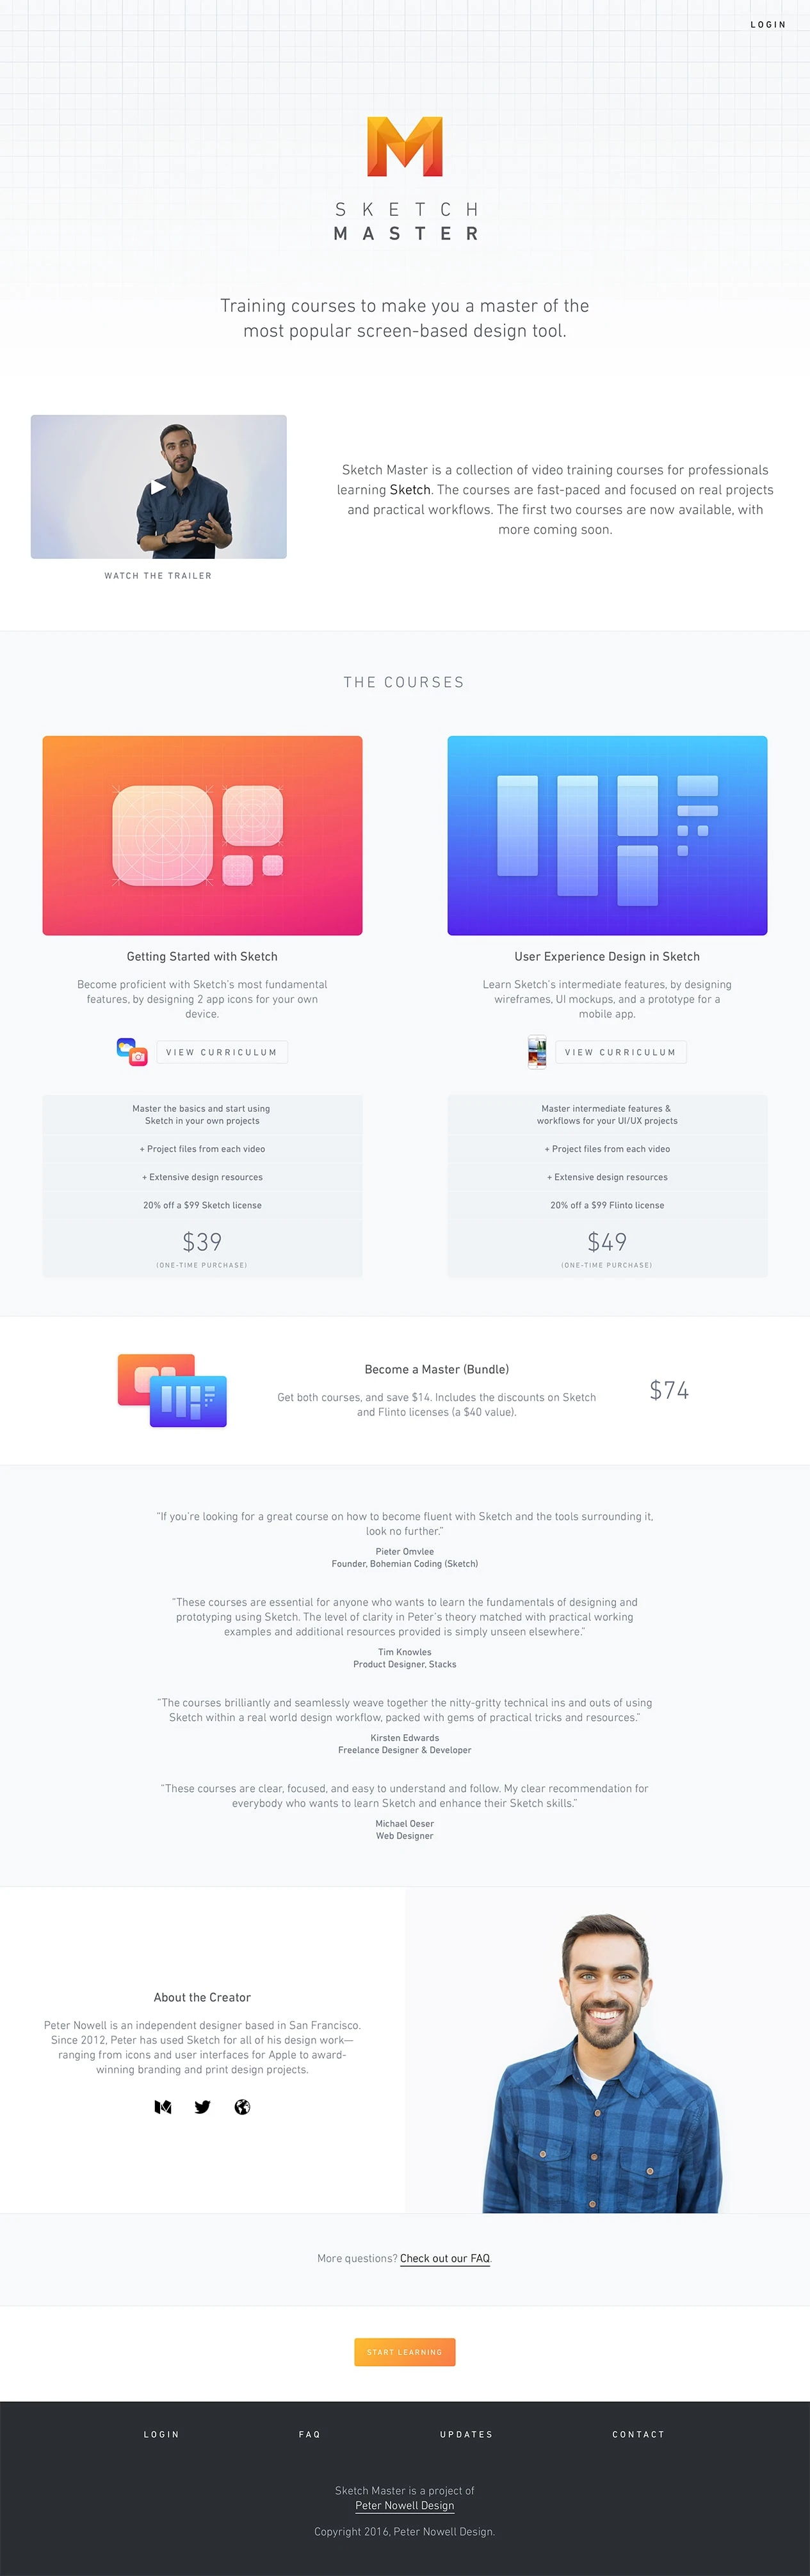 Sketch Master Landing Page Example: Sketch Master is a collection of video training courses for professionals learning Sketch. The courses are fast-paced and focused on real projects and practical workflows